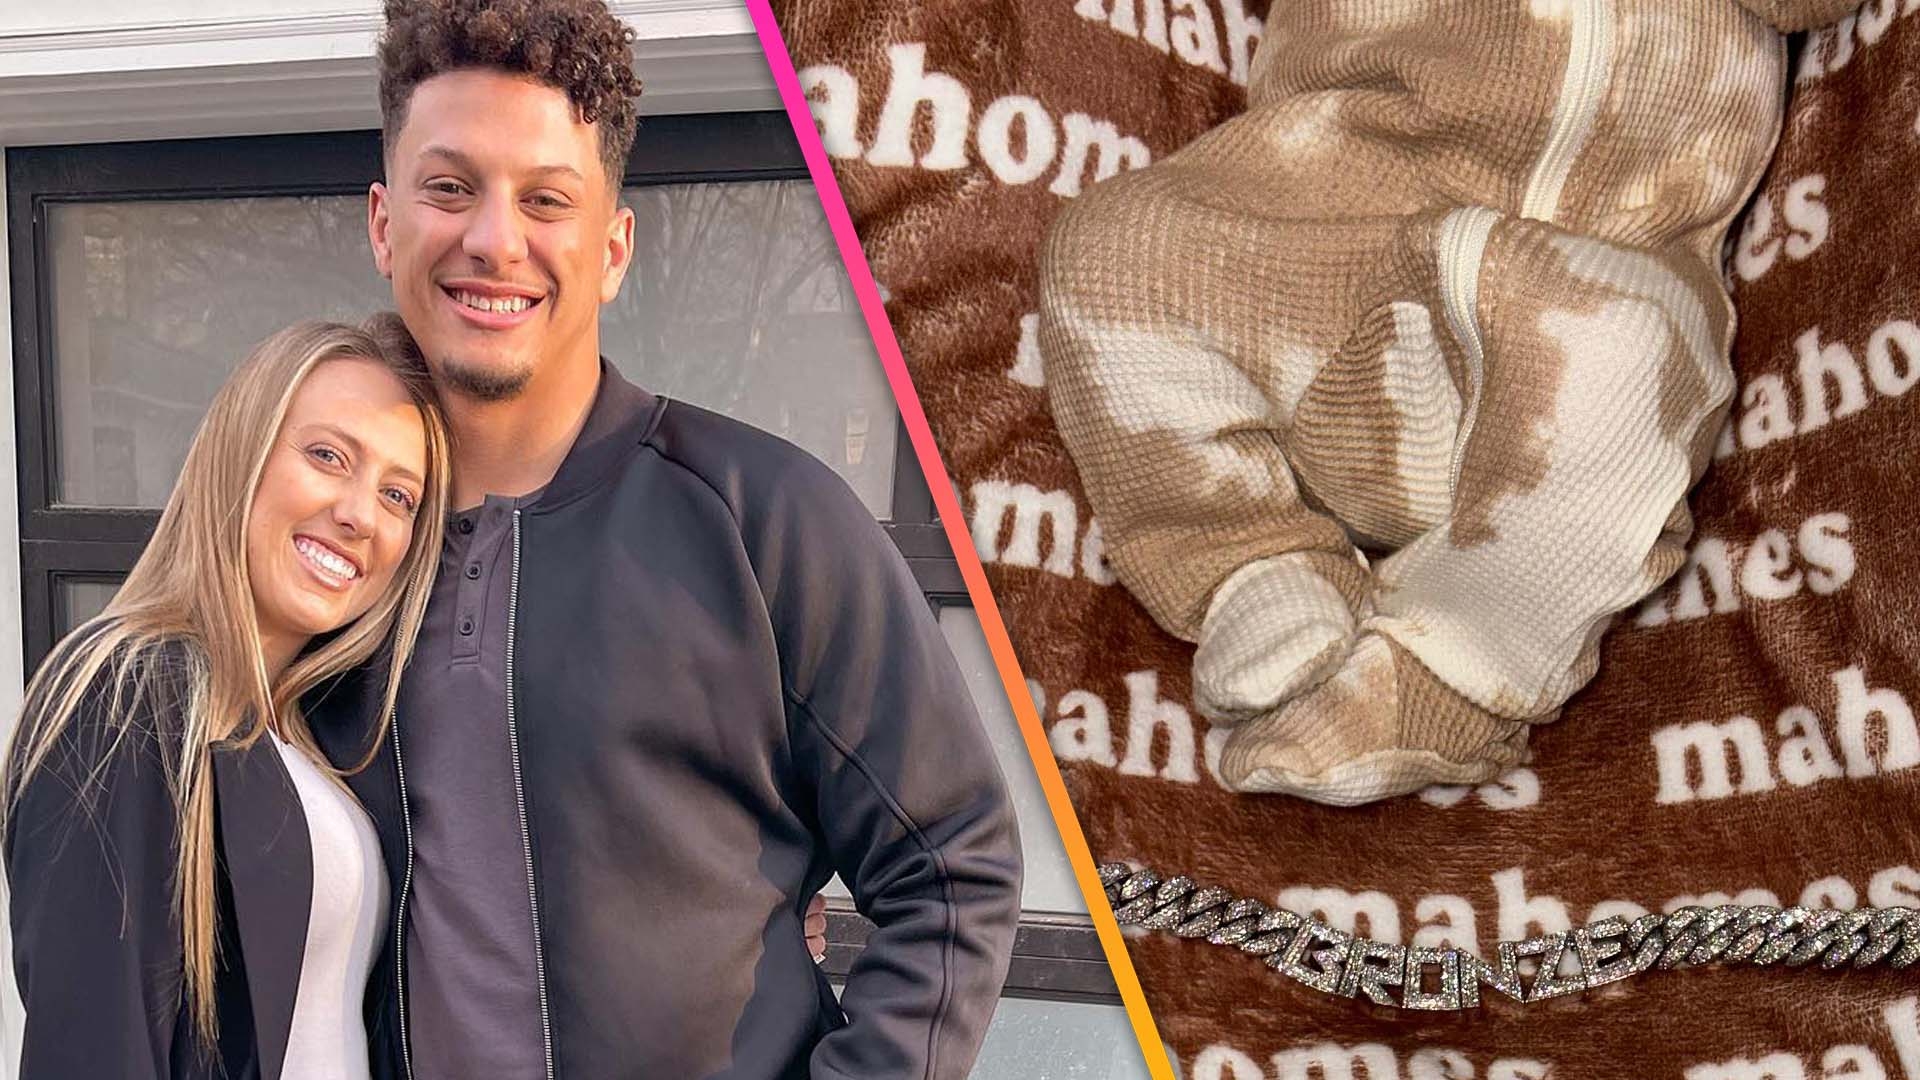 Patrick Mahomes' mom calls out online haters: What do you get out